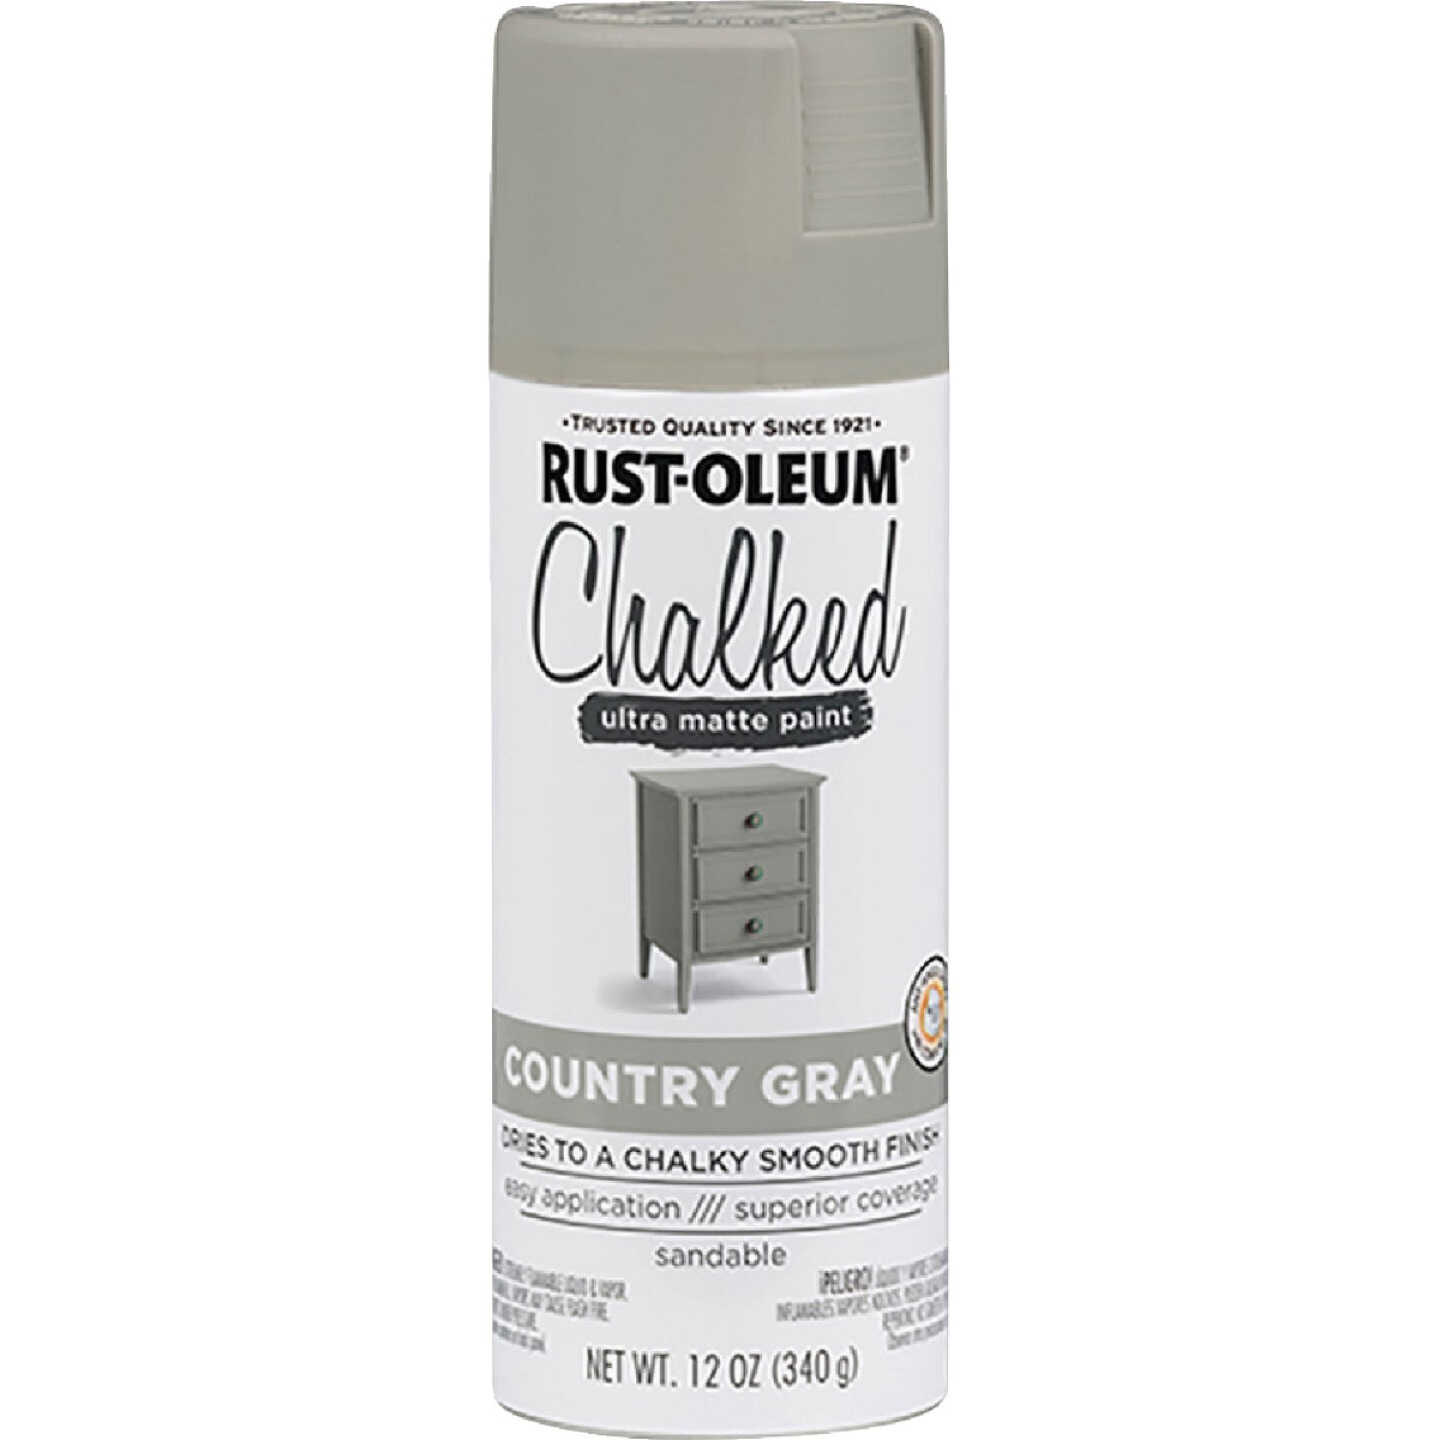 Painting with Rust-Oleum Chalked Spray Paint - Stylish Revamp